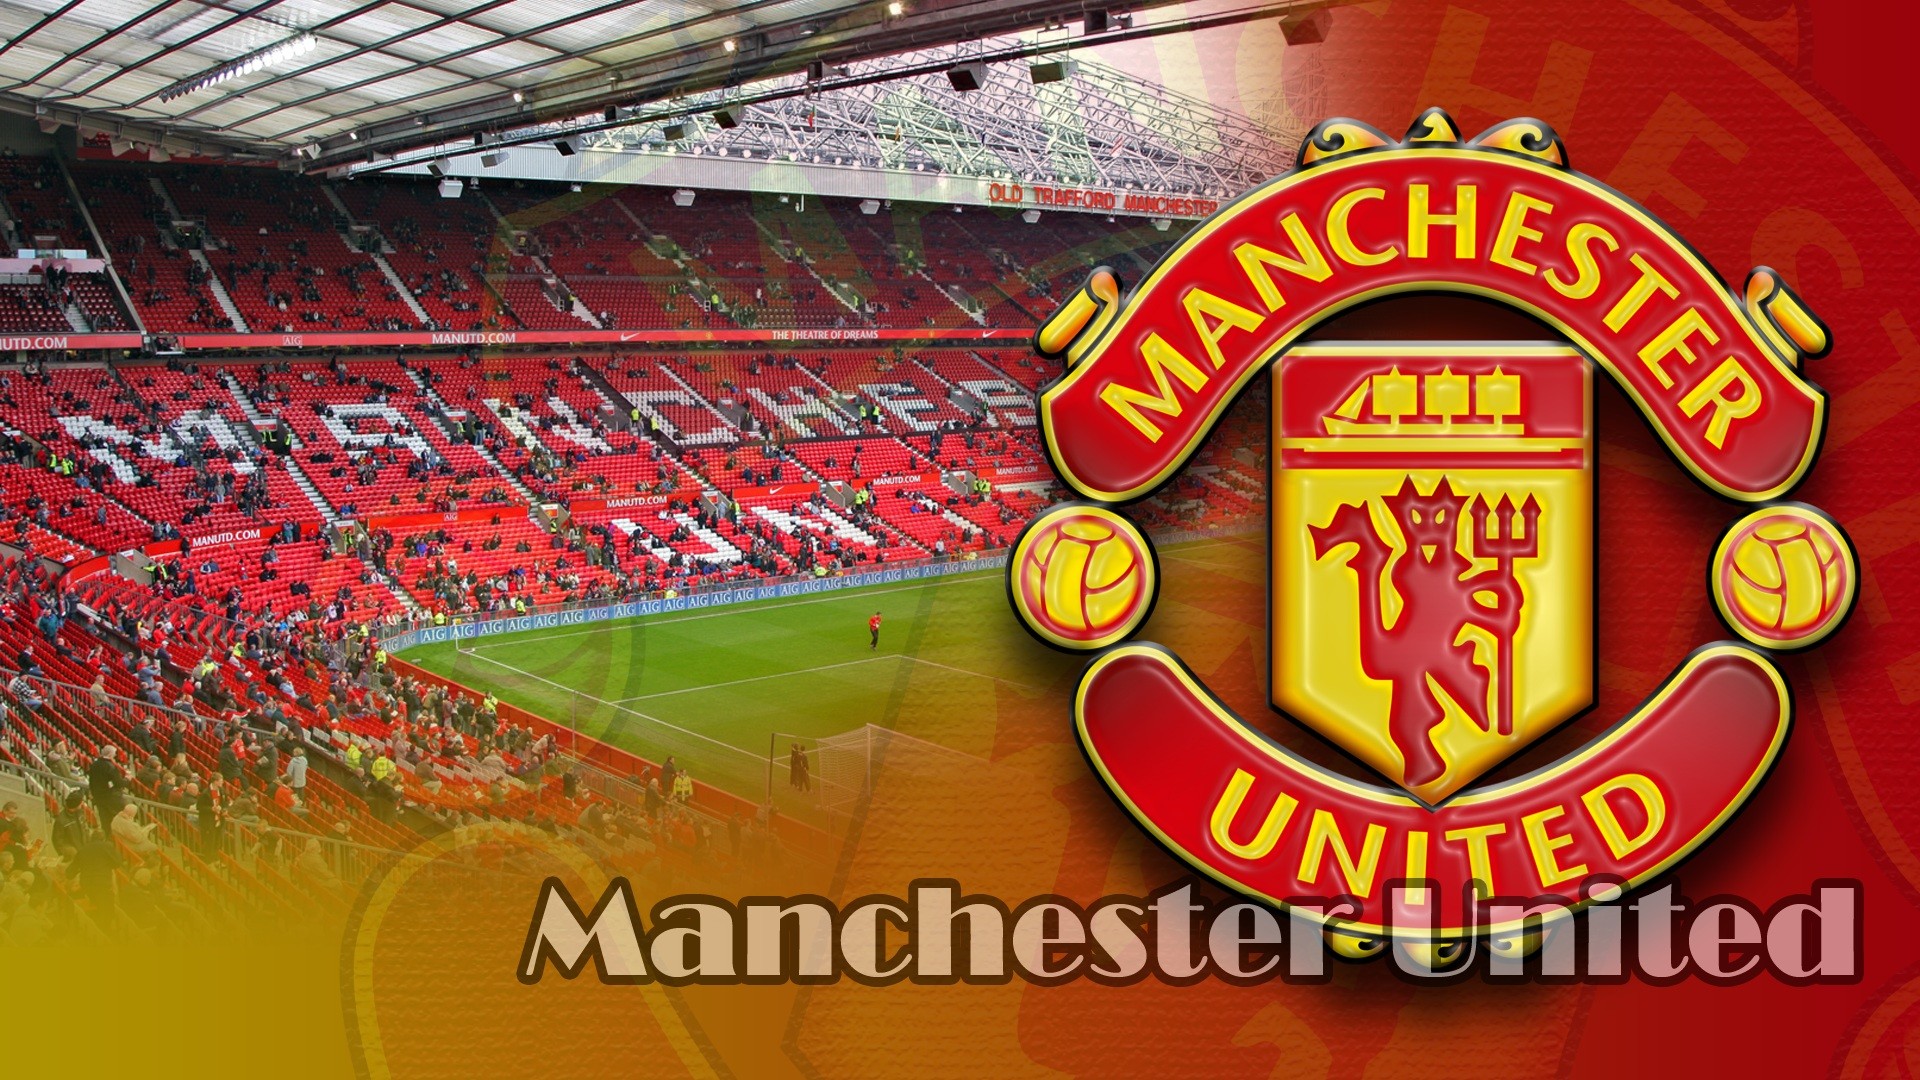 1920x1080 Best Download Manchester United Logo Wallpapers.